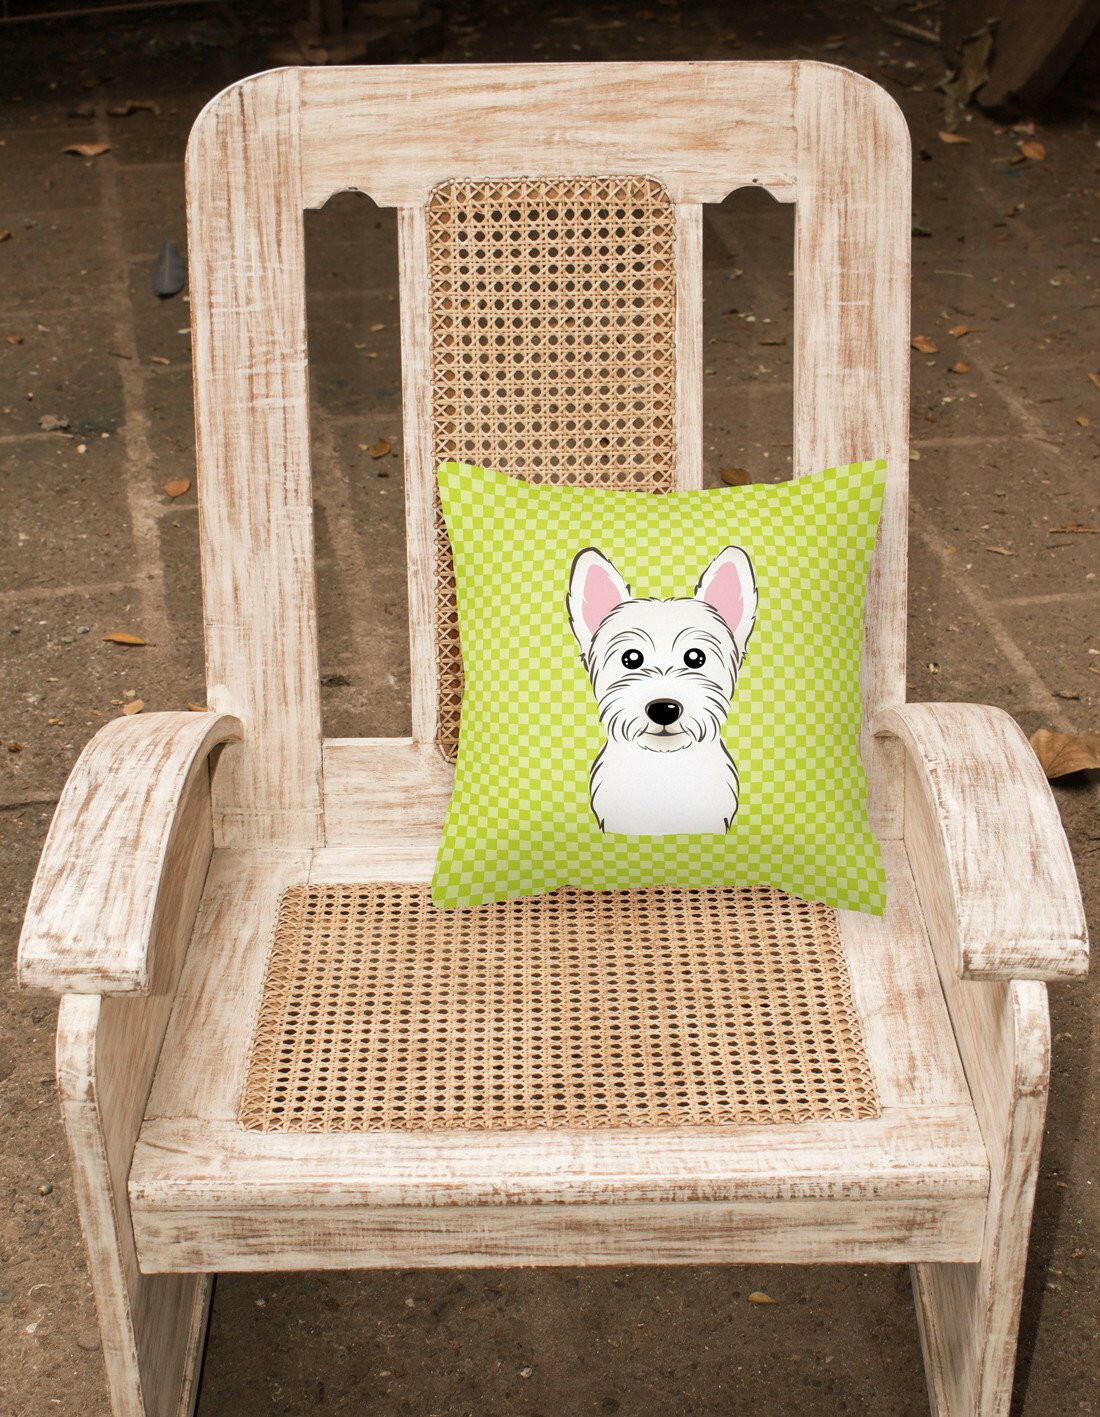 Checkerboard Lime Green Westie Canvas Fabric Decorative Pillow BB1288PW1414 - the-store.com